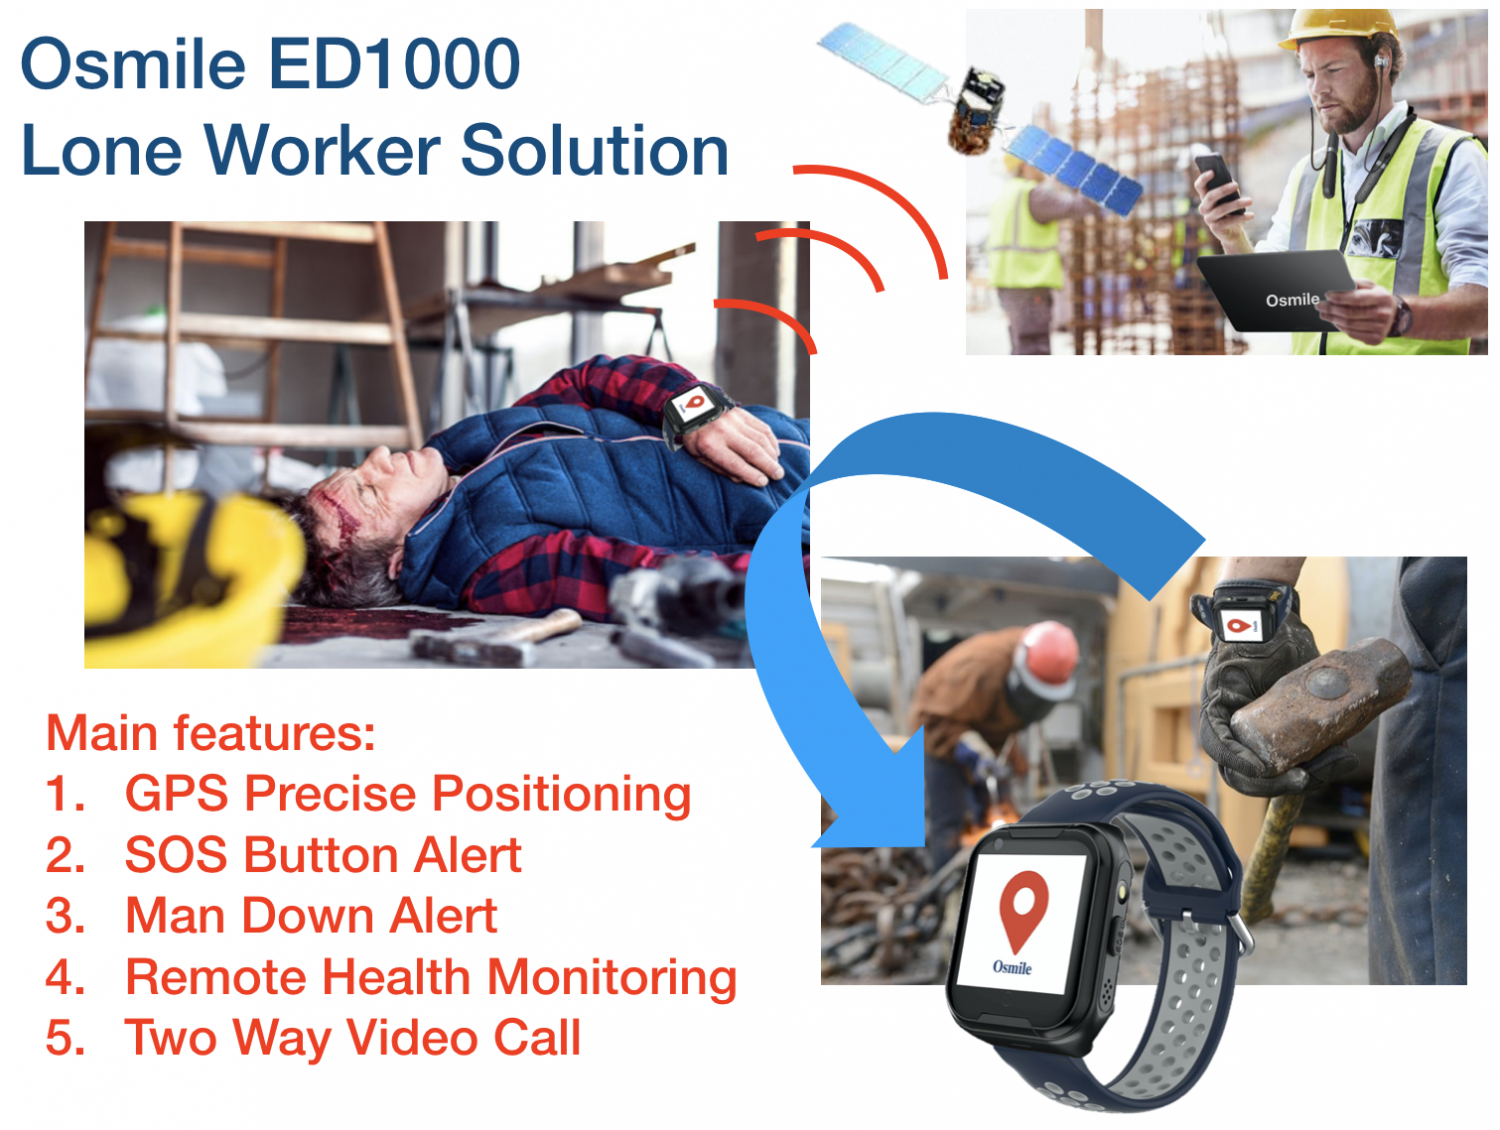 Osmile ED1000 SOS Alert for Security Management up to 50 lone worke1 (Includes Wireless Headset)